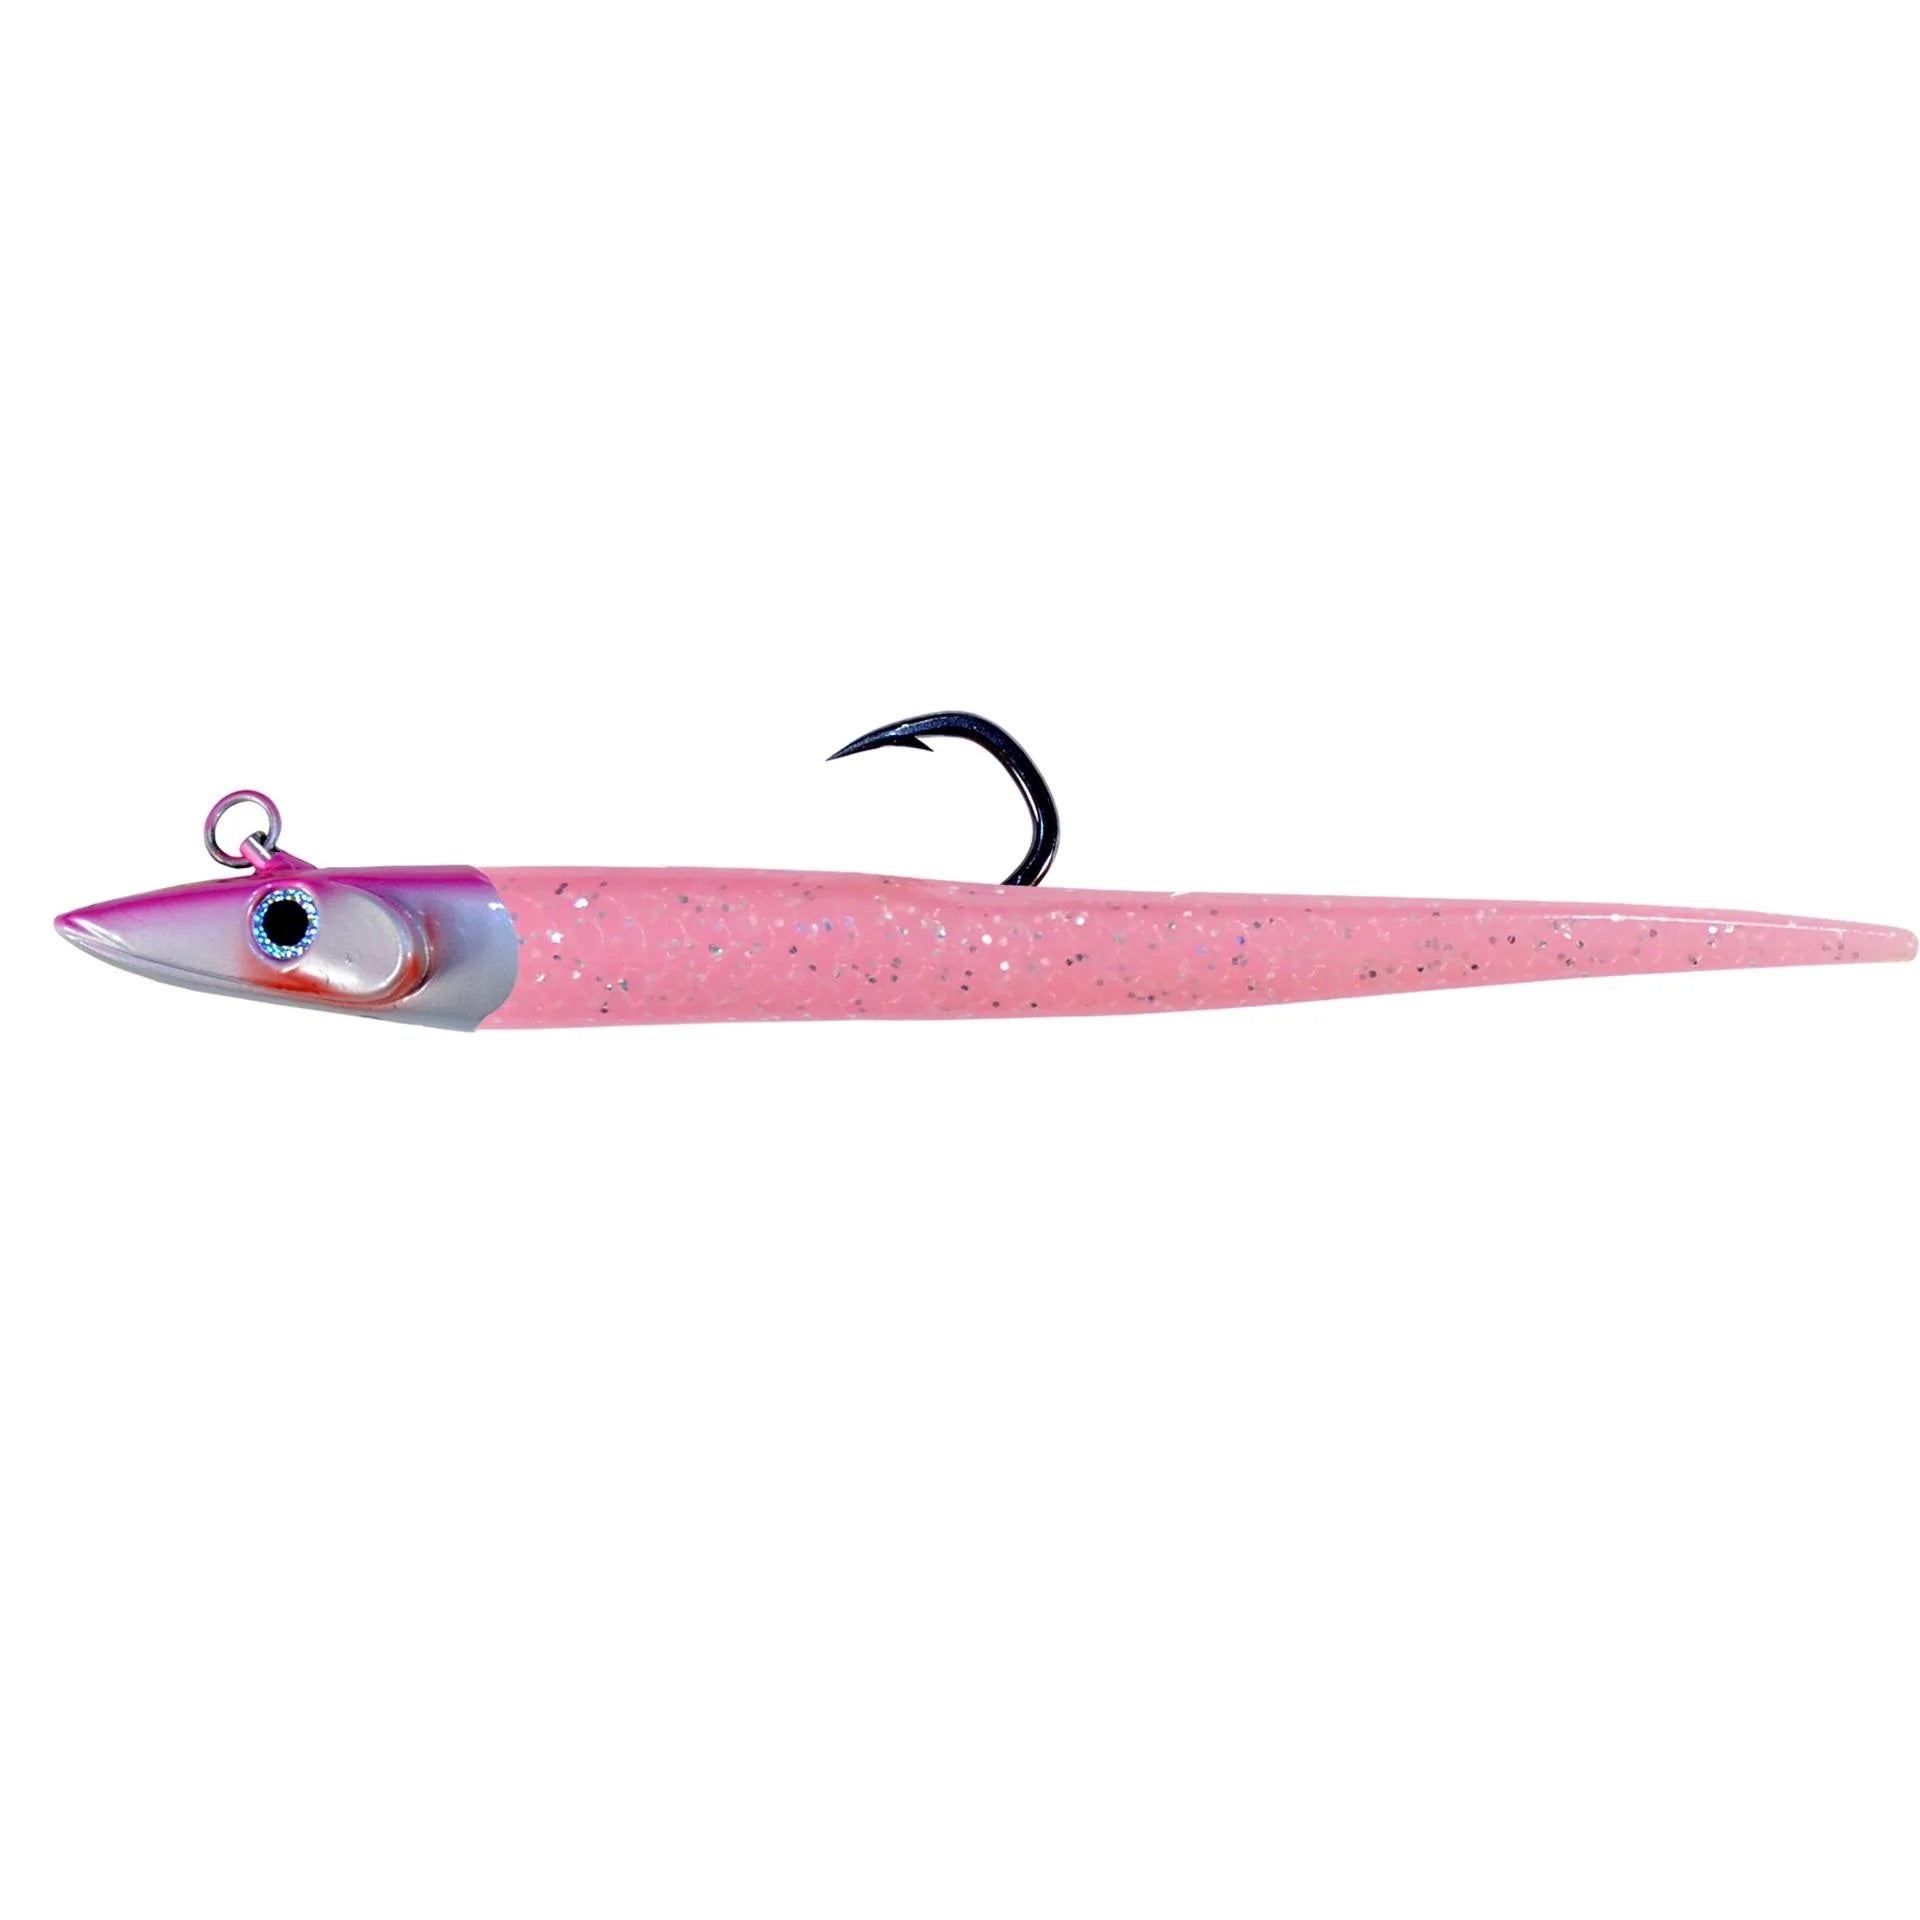 Savage Gear Sandeel Soft Plastic Lures – White Water Outfitters